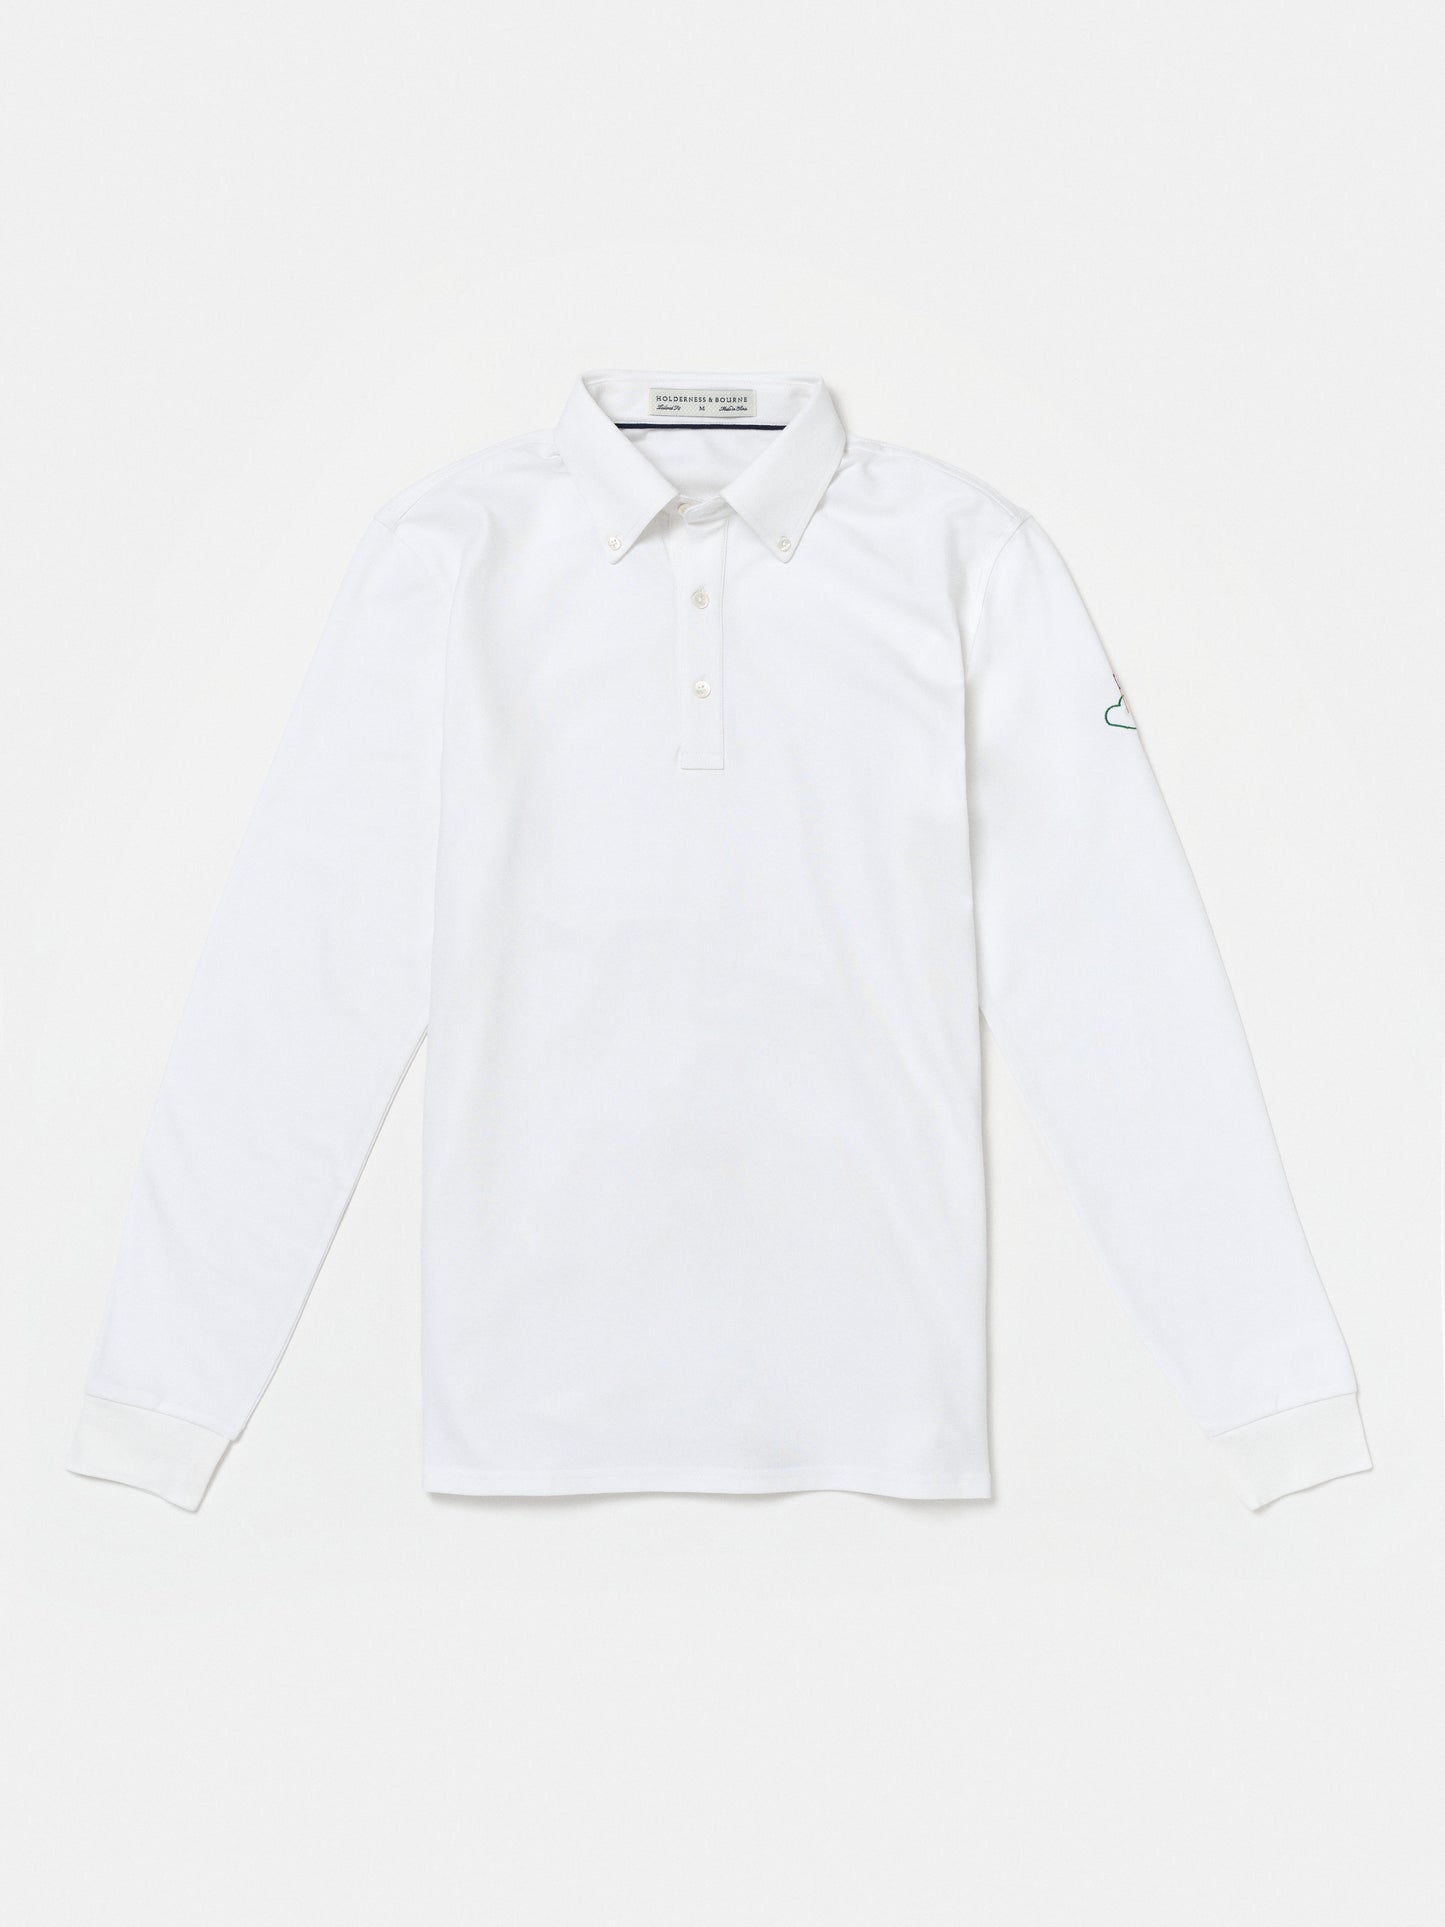 Holderness & Bourne Long Sleeve Pique Polo Shirt in White